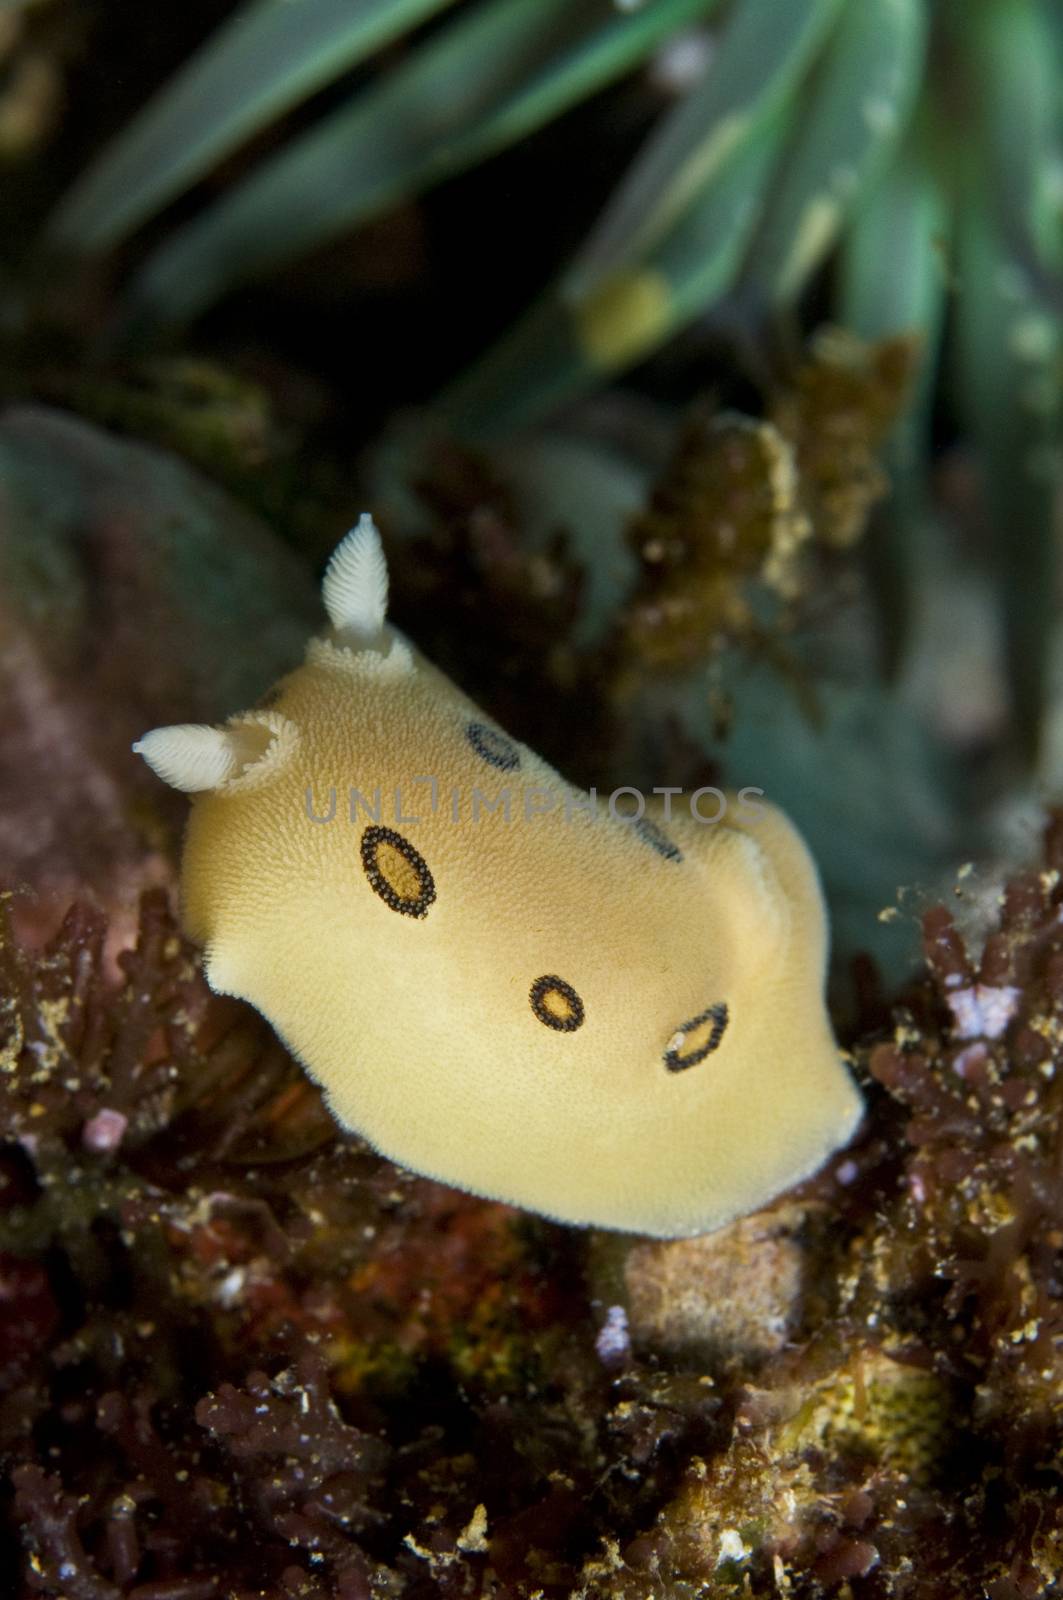 Diaulula sandiegensis (San Diego dorid) up to 80mm, from Alaska to Baja California, to Mexico and Japan.